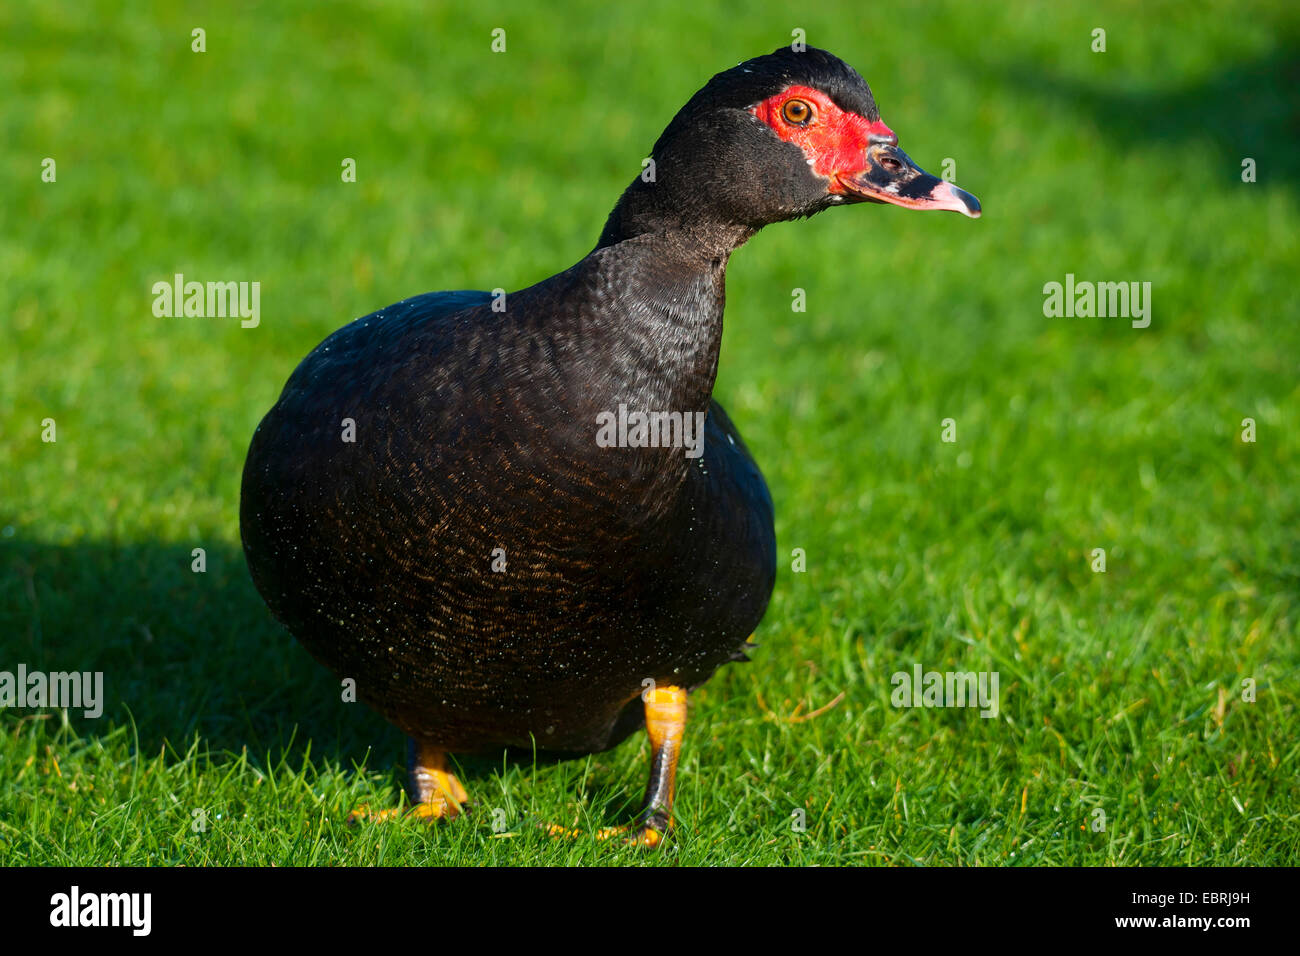 Muscovy duck (Cairina moschata), black exemplar of the domesticated form of the genus Cairina in the open-air enclosure, Germany, North Rhine-Westphalia Stock Photo